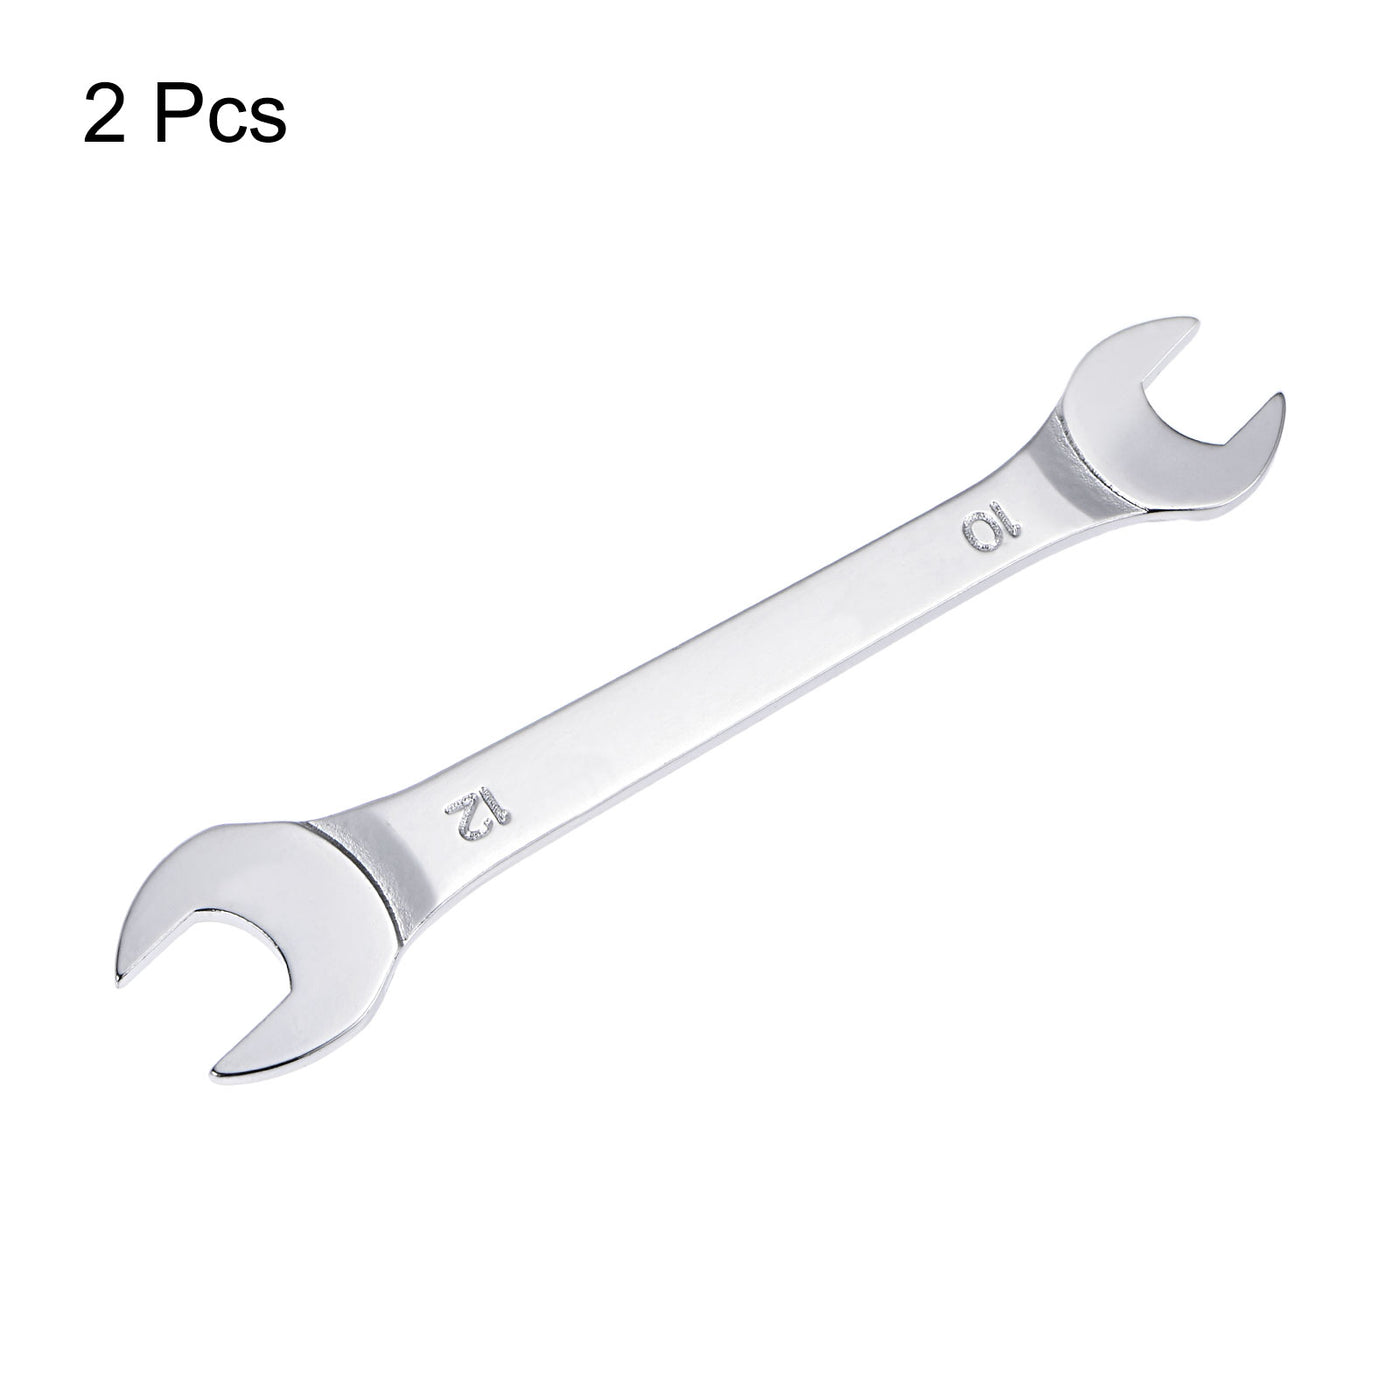 uxcell Uxcell Thin Open End Wrench Metric Chrome Plated High Carbon Steel